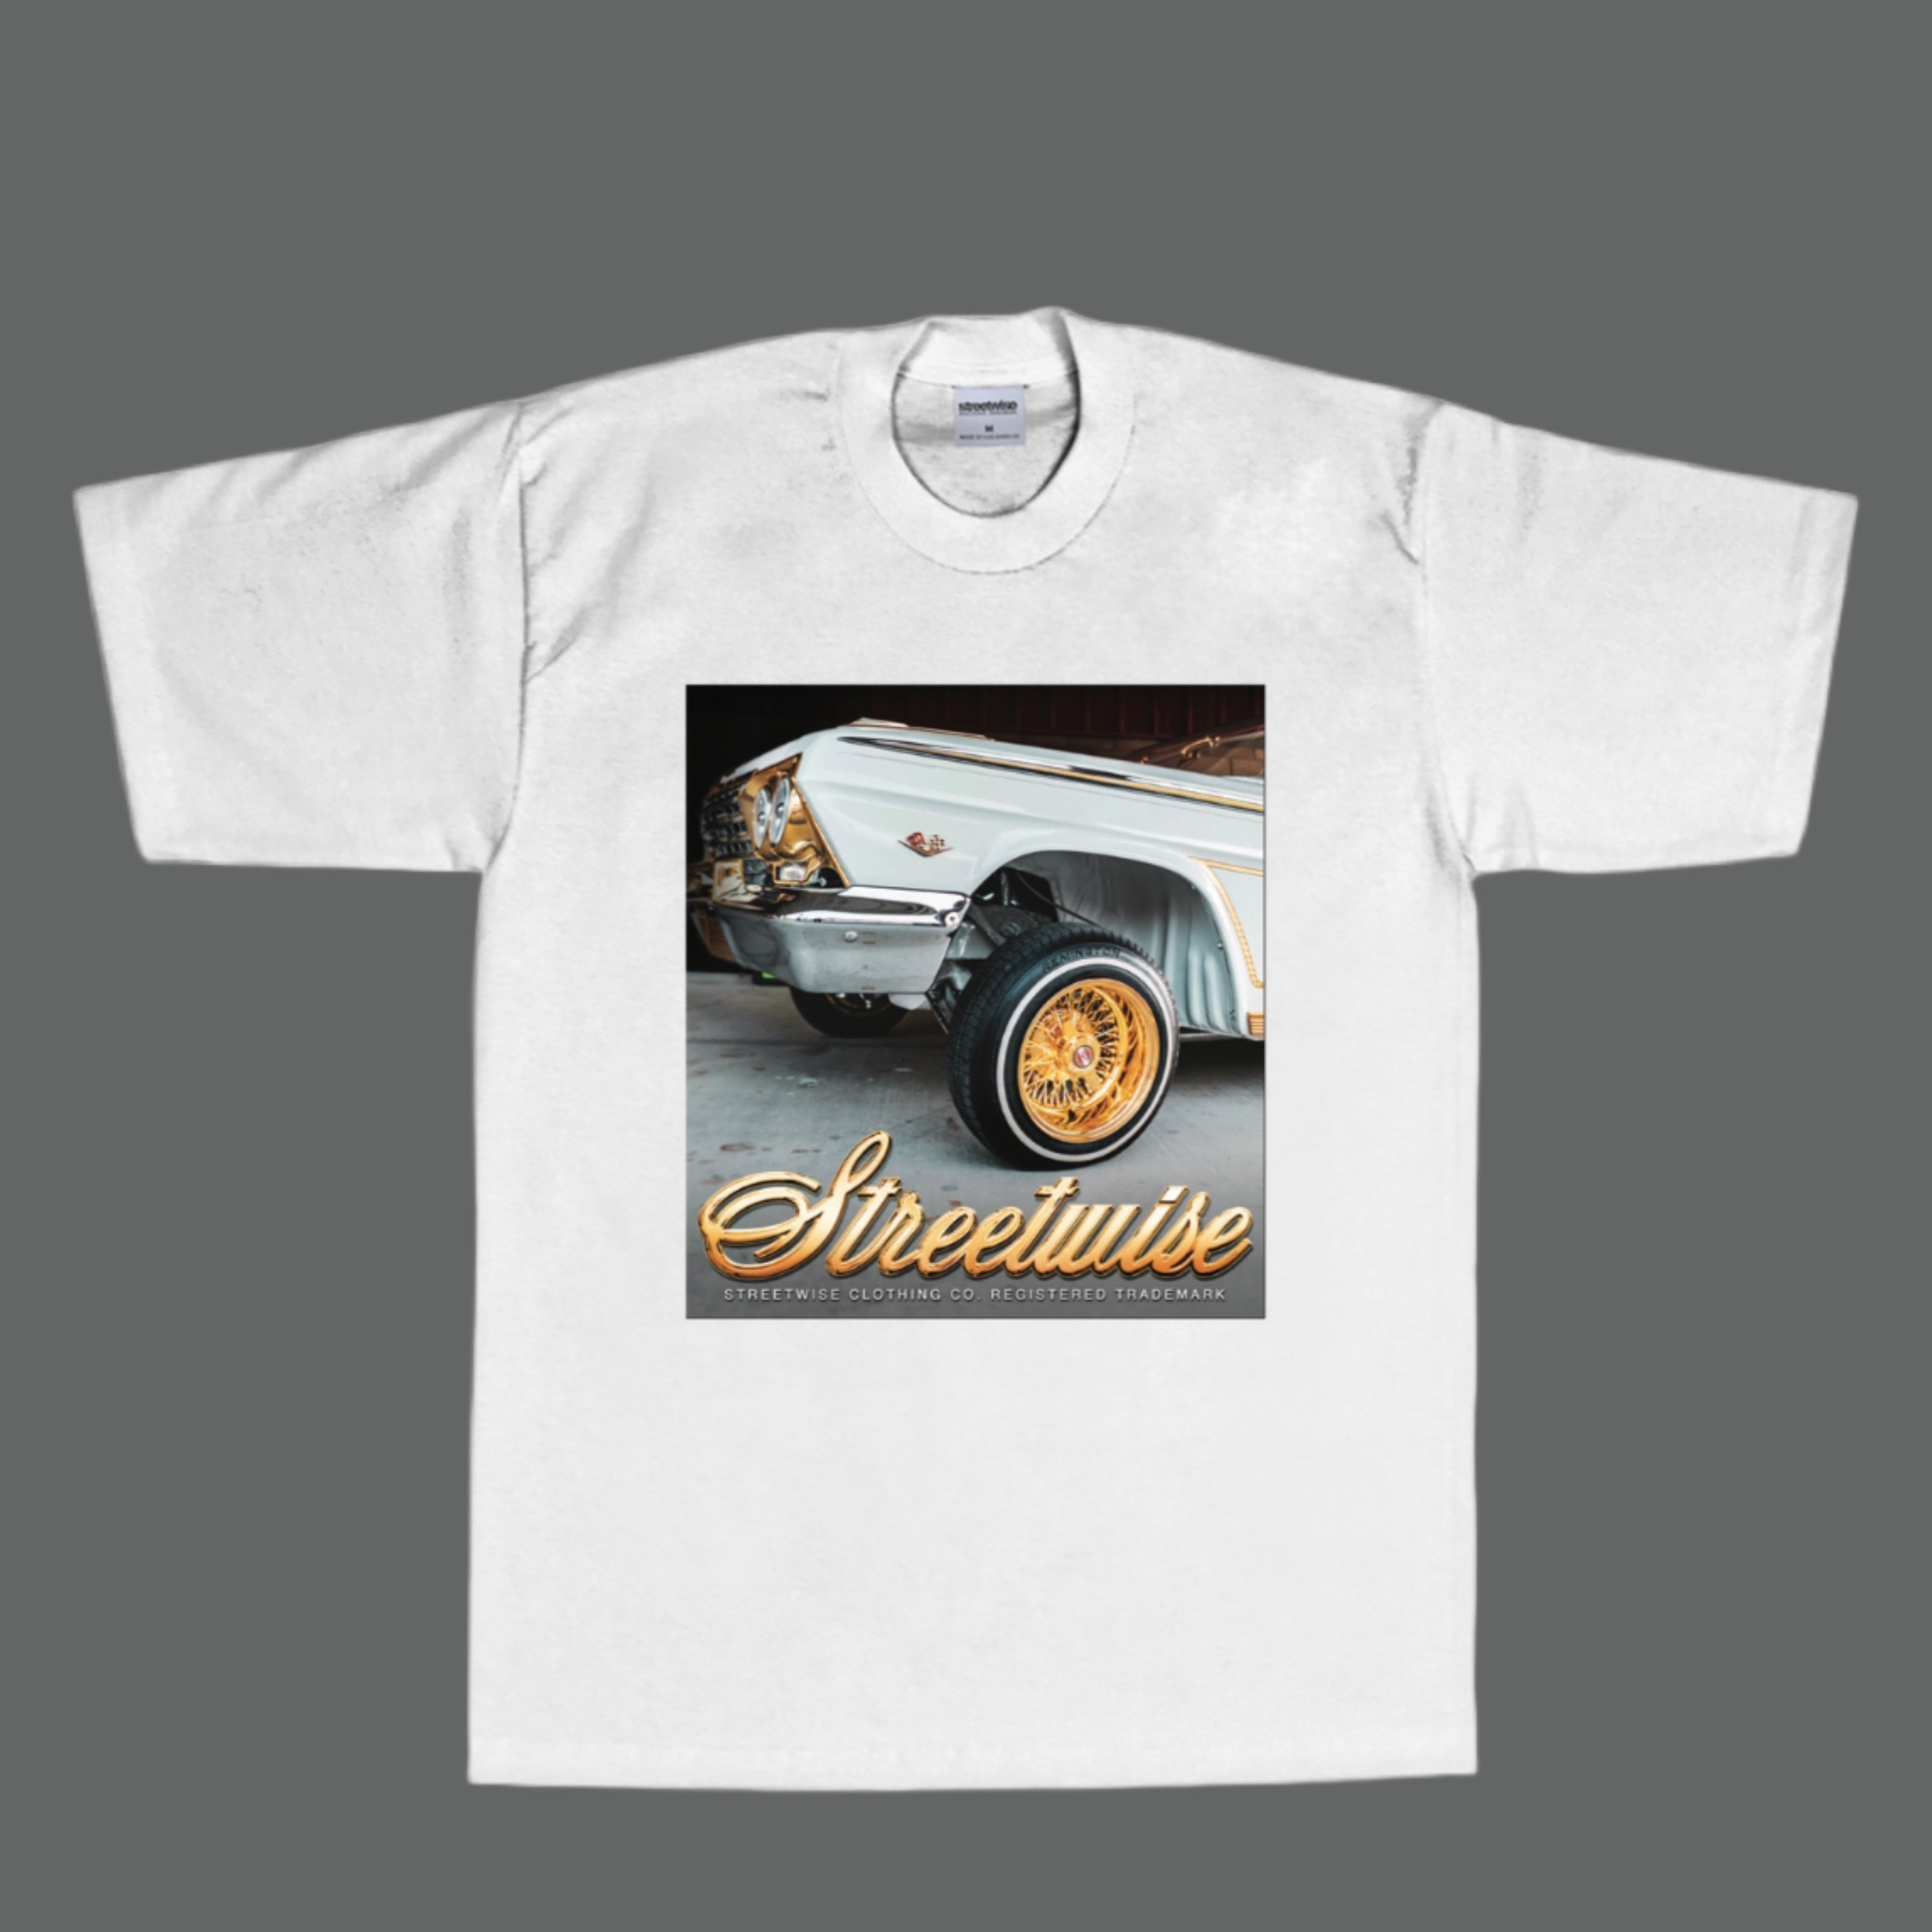 Streetwise GOLD 62 T-Shirt